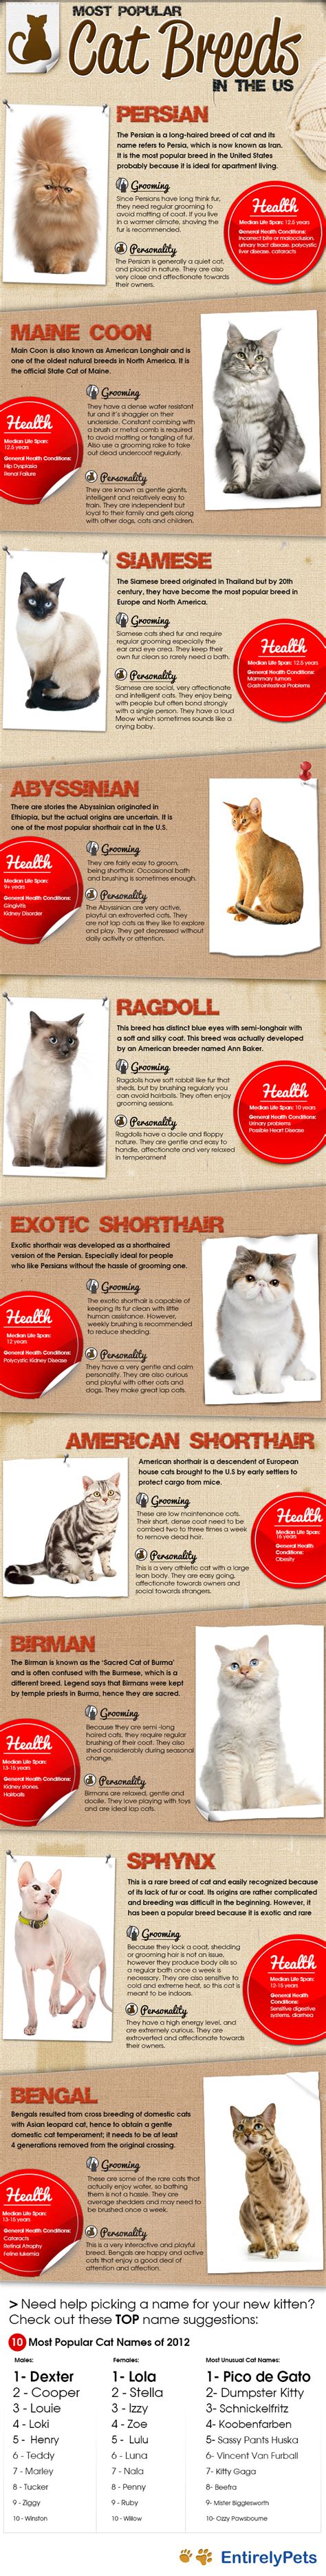 Most Popular Cat Breeds In The US (Infographic)